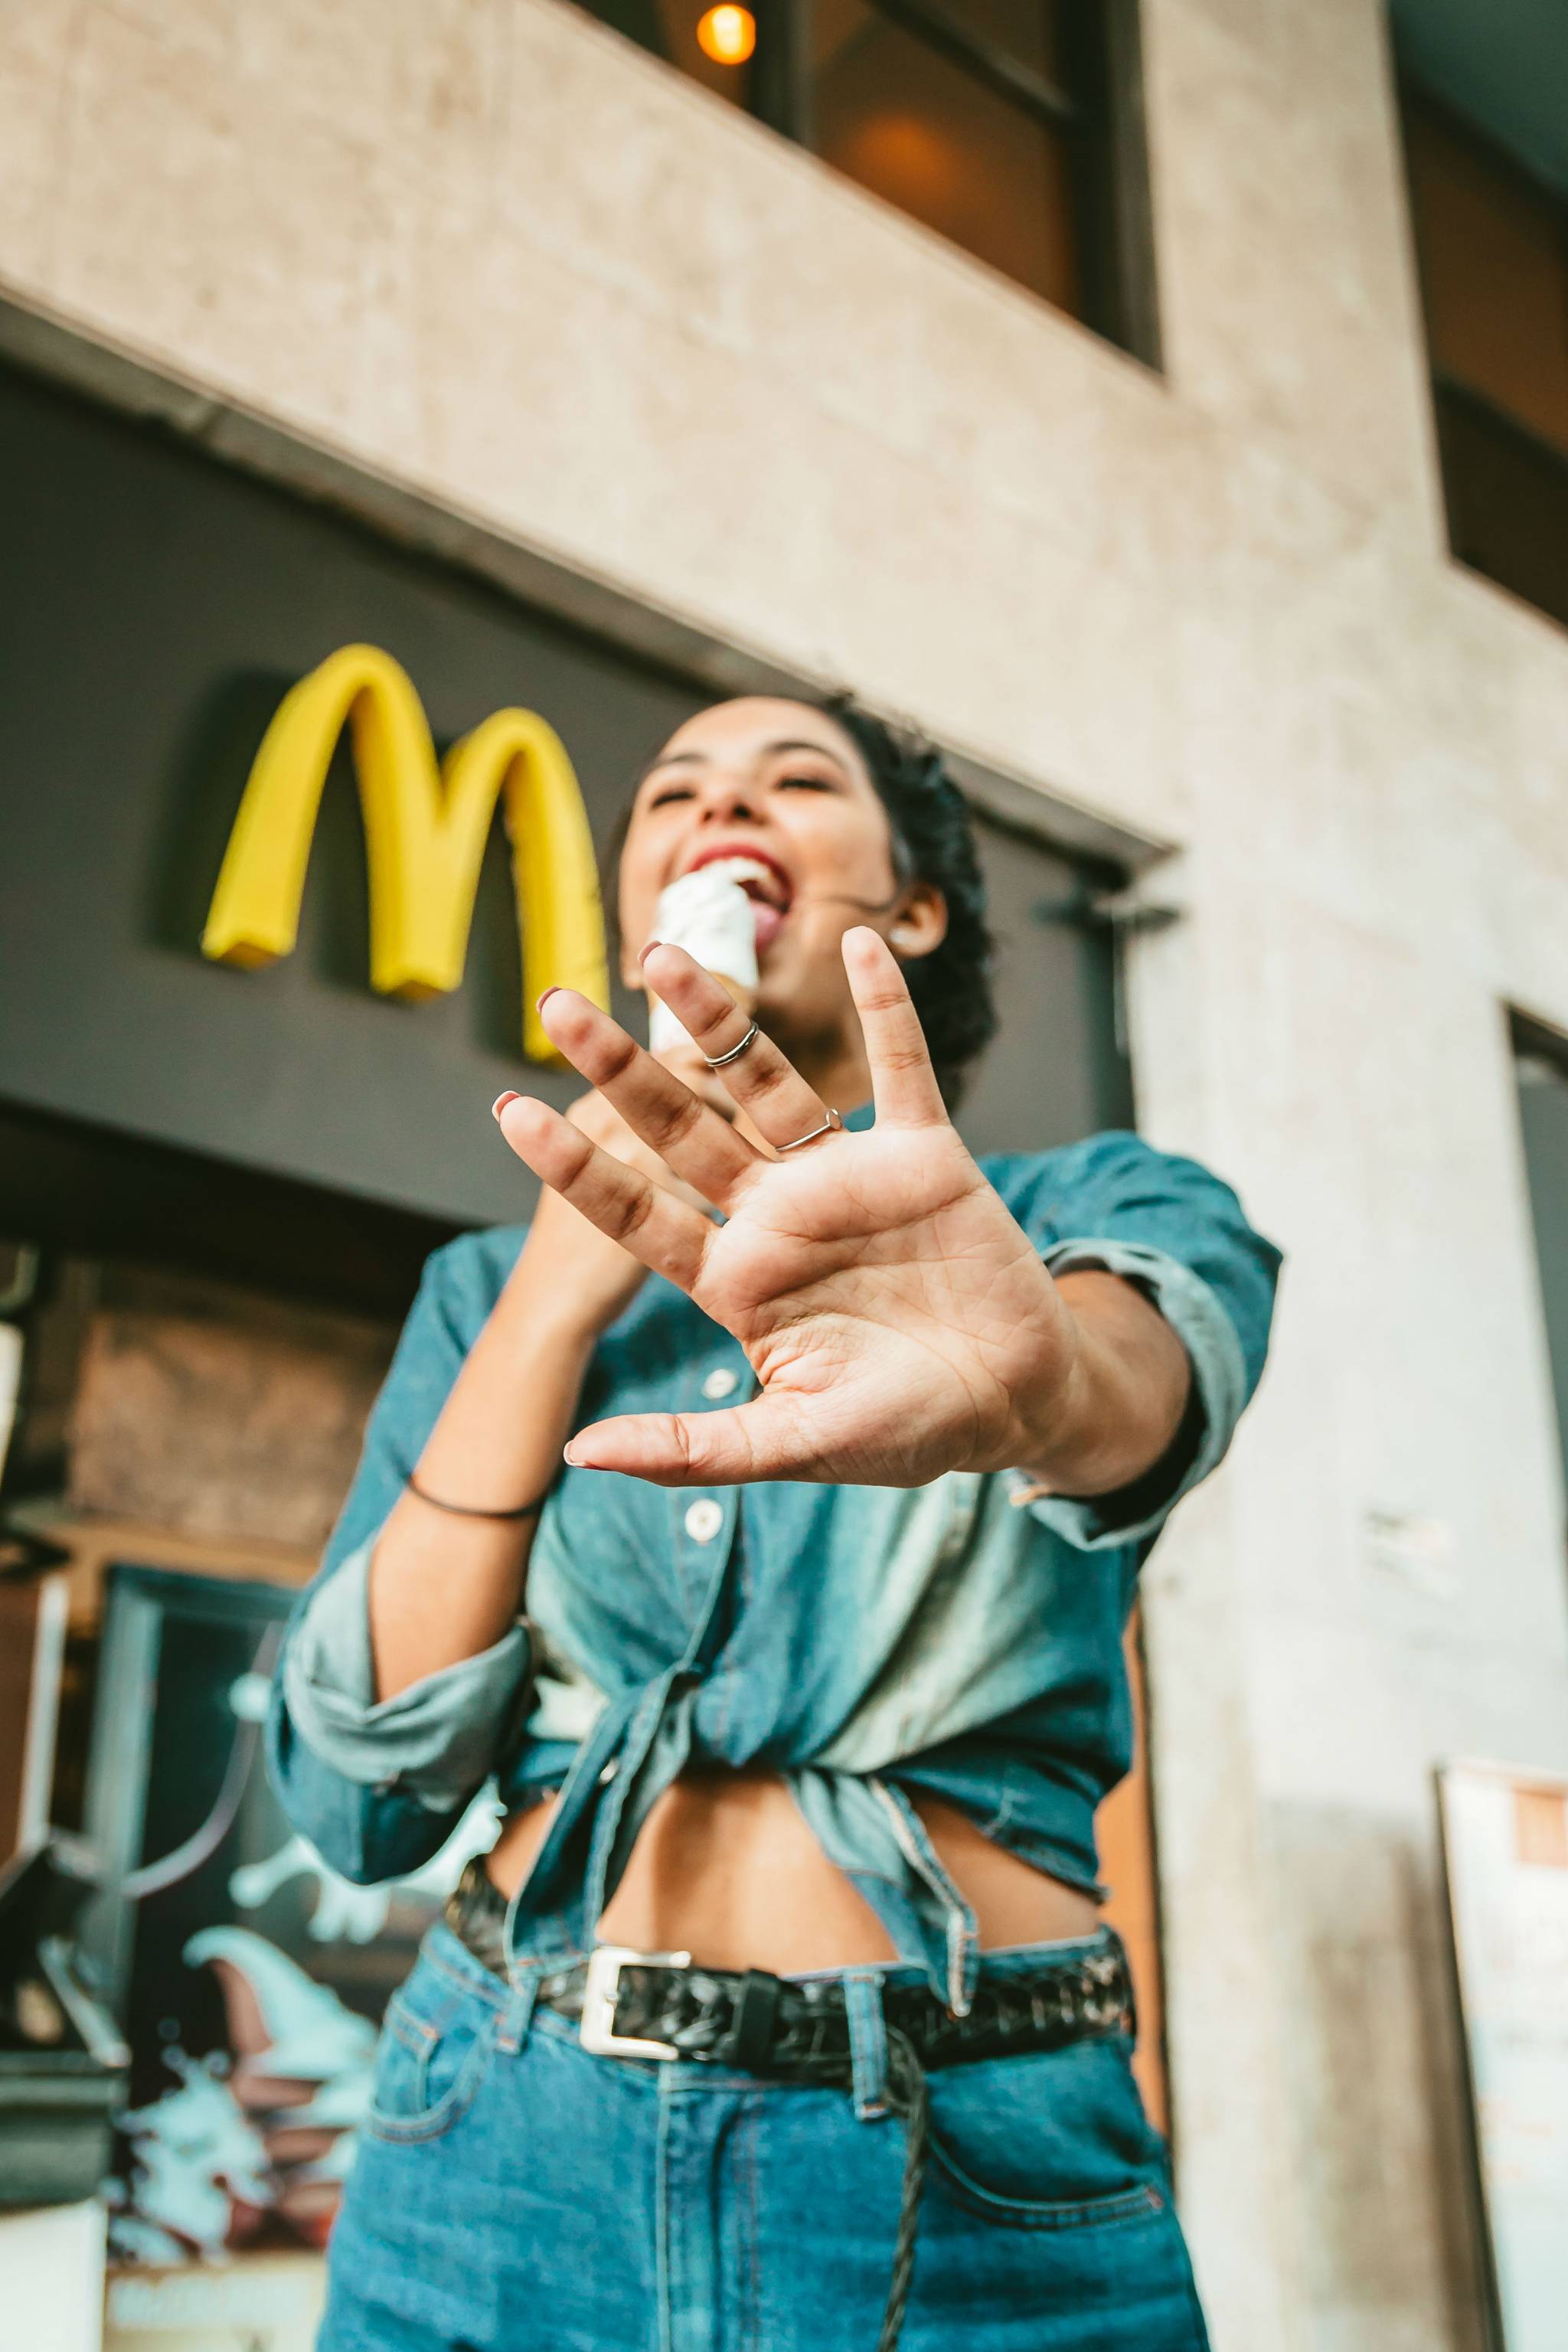 McDonald's contactless enables seamless payments